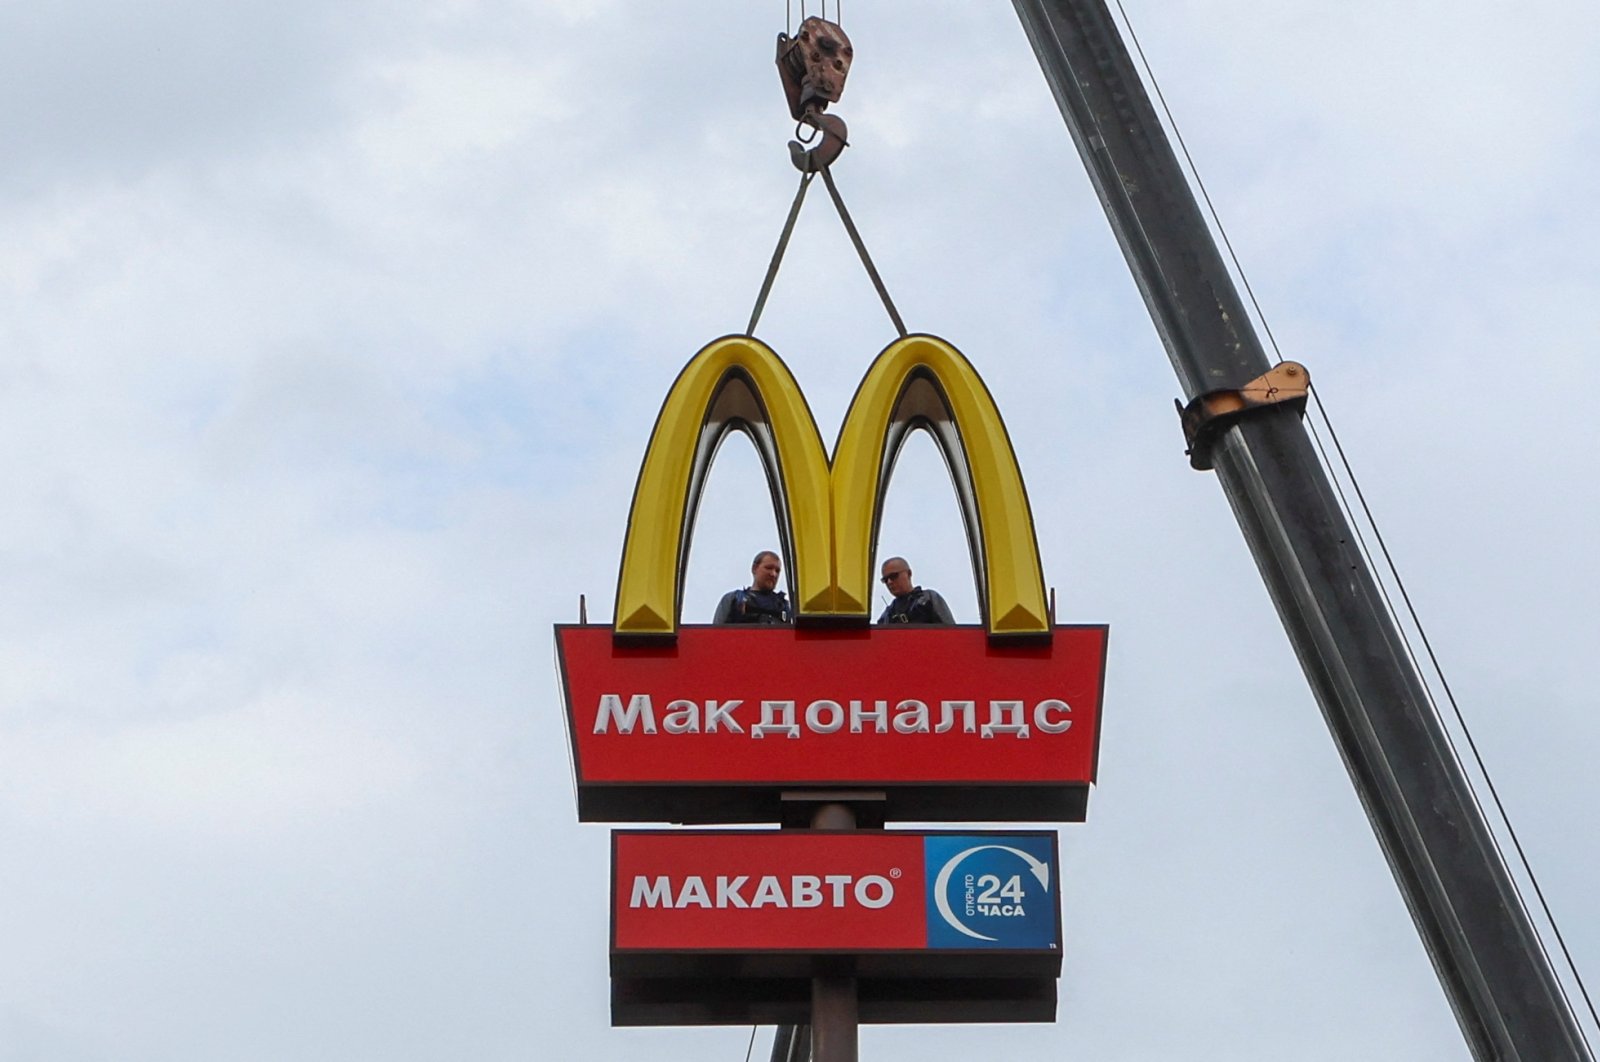 Workers use a crane to dismantle the McDonald&#039;s Golden Arches while removing the logo signage from a drive-through restaurant of McDonald&#039;s in the town of Kingisepp in the Leningrad region, Russia June 8, 2022. (Reuters Photo)